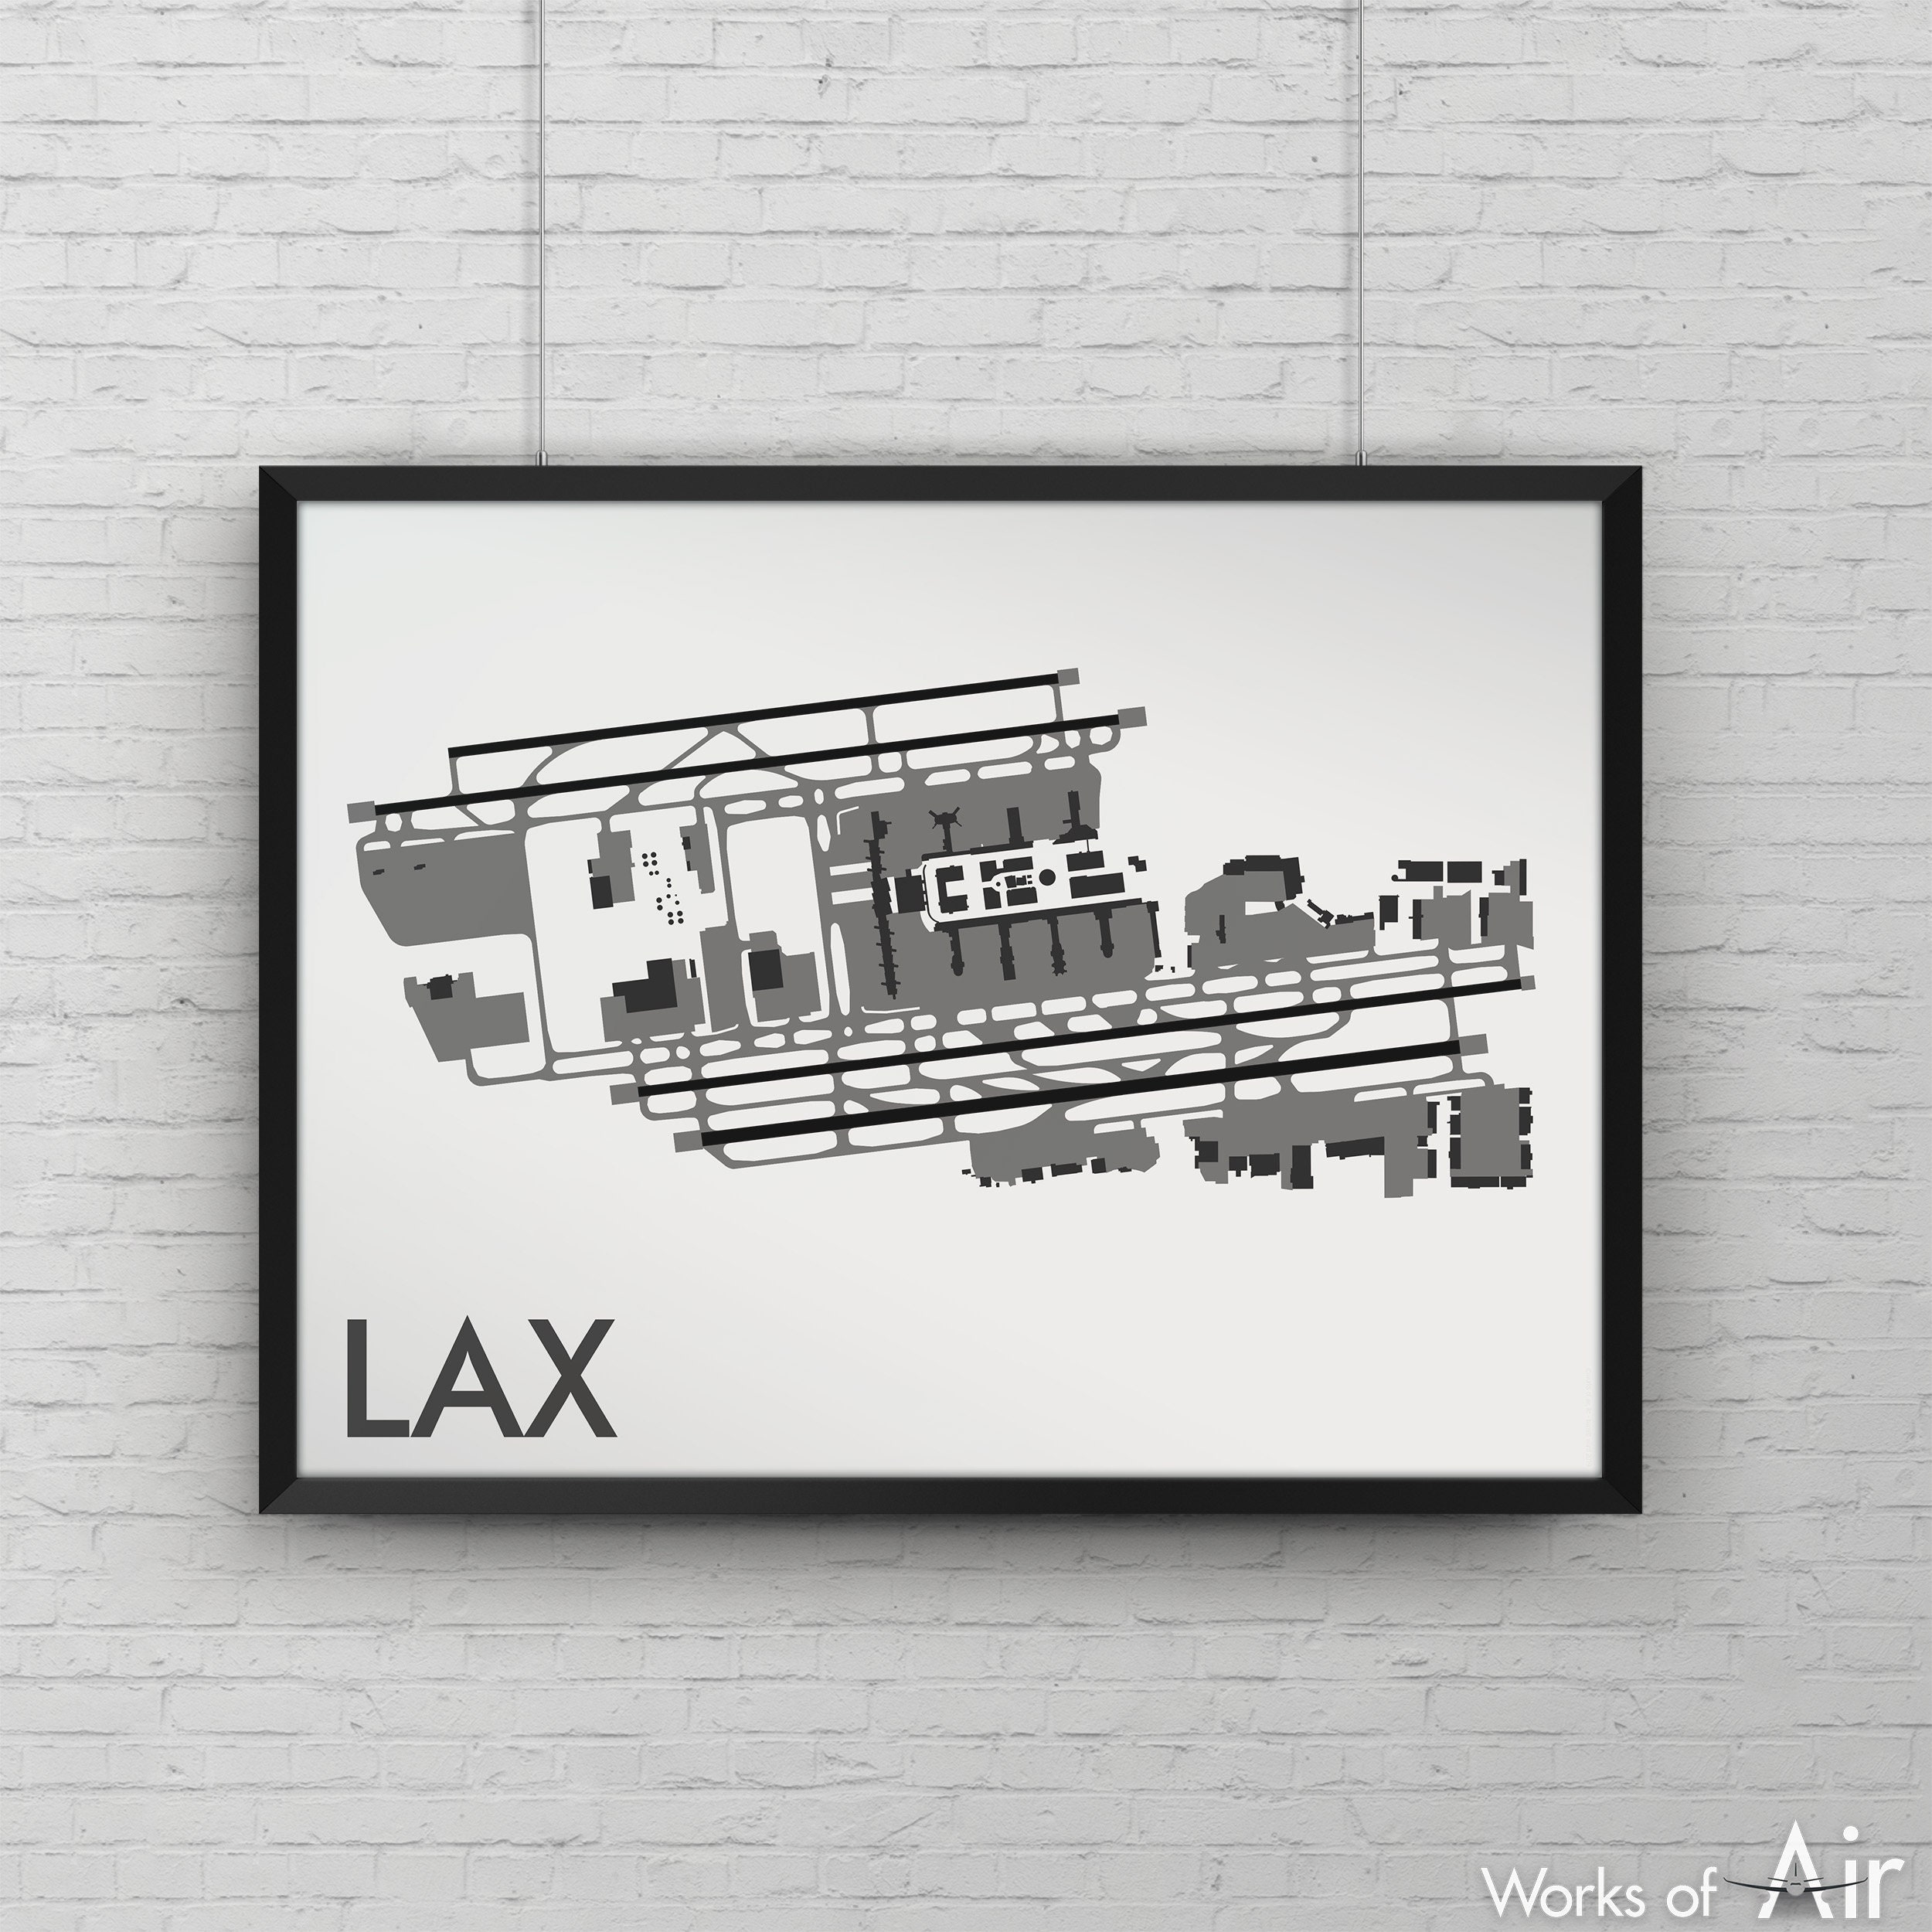 Lax - Etsy Poster Airport